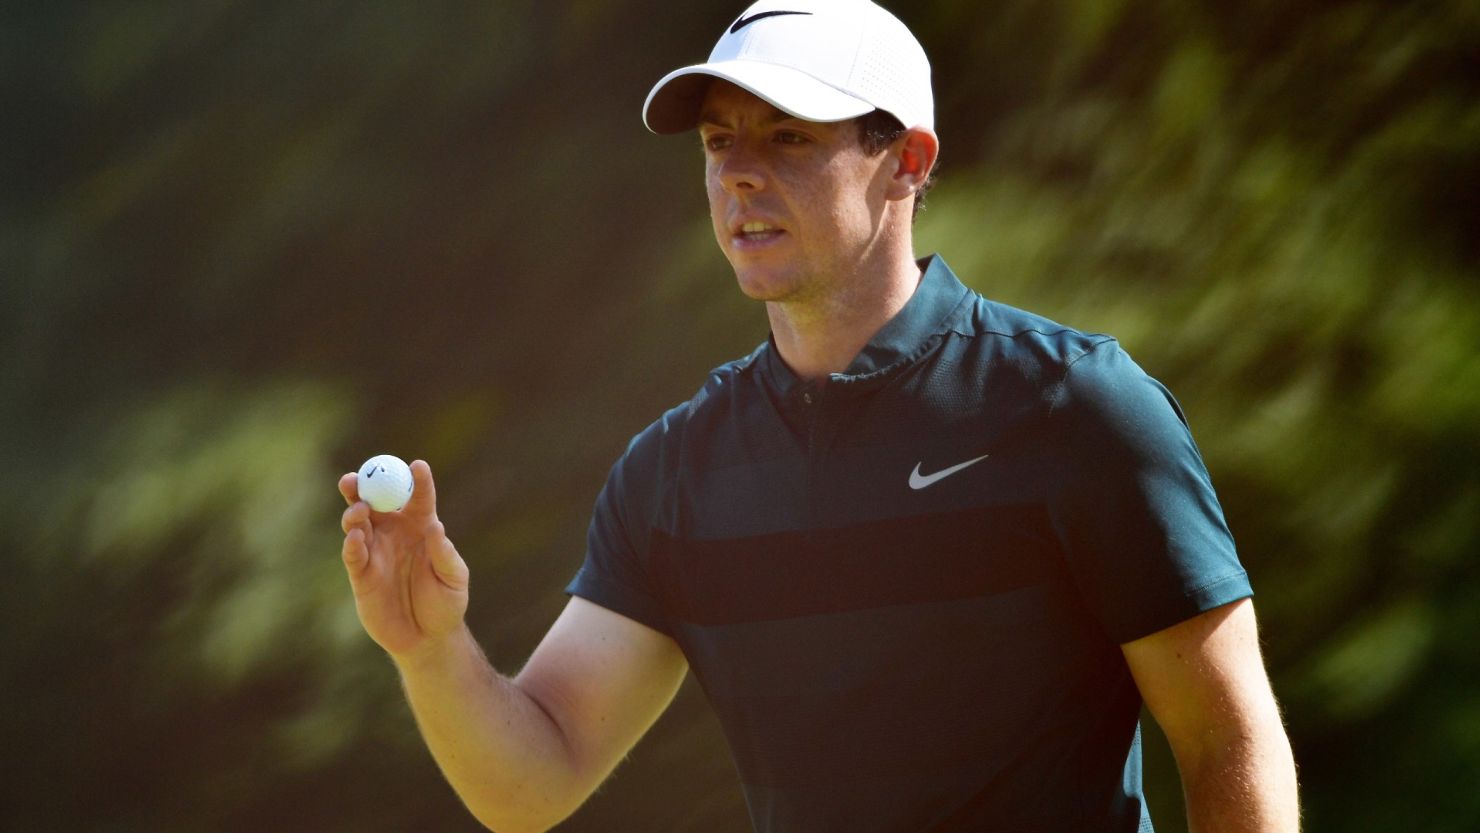 Rory McIlroy during the first round of the PGA Championship at Baltusrol Golf Club in Springfield, New Jersey, on July 28.